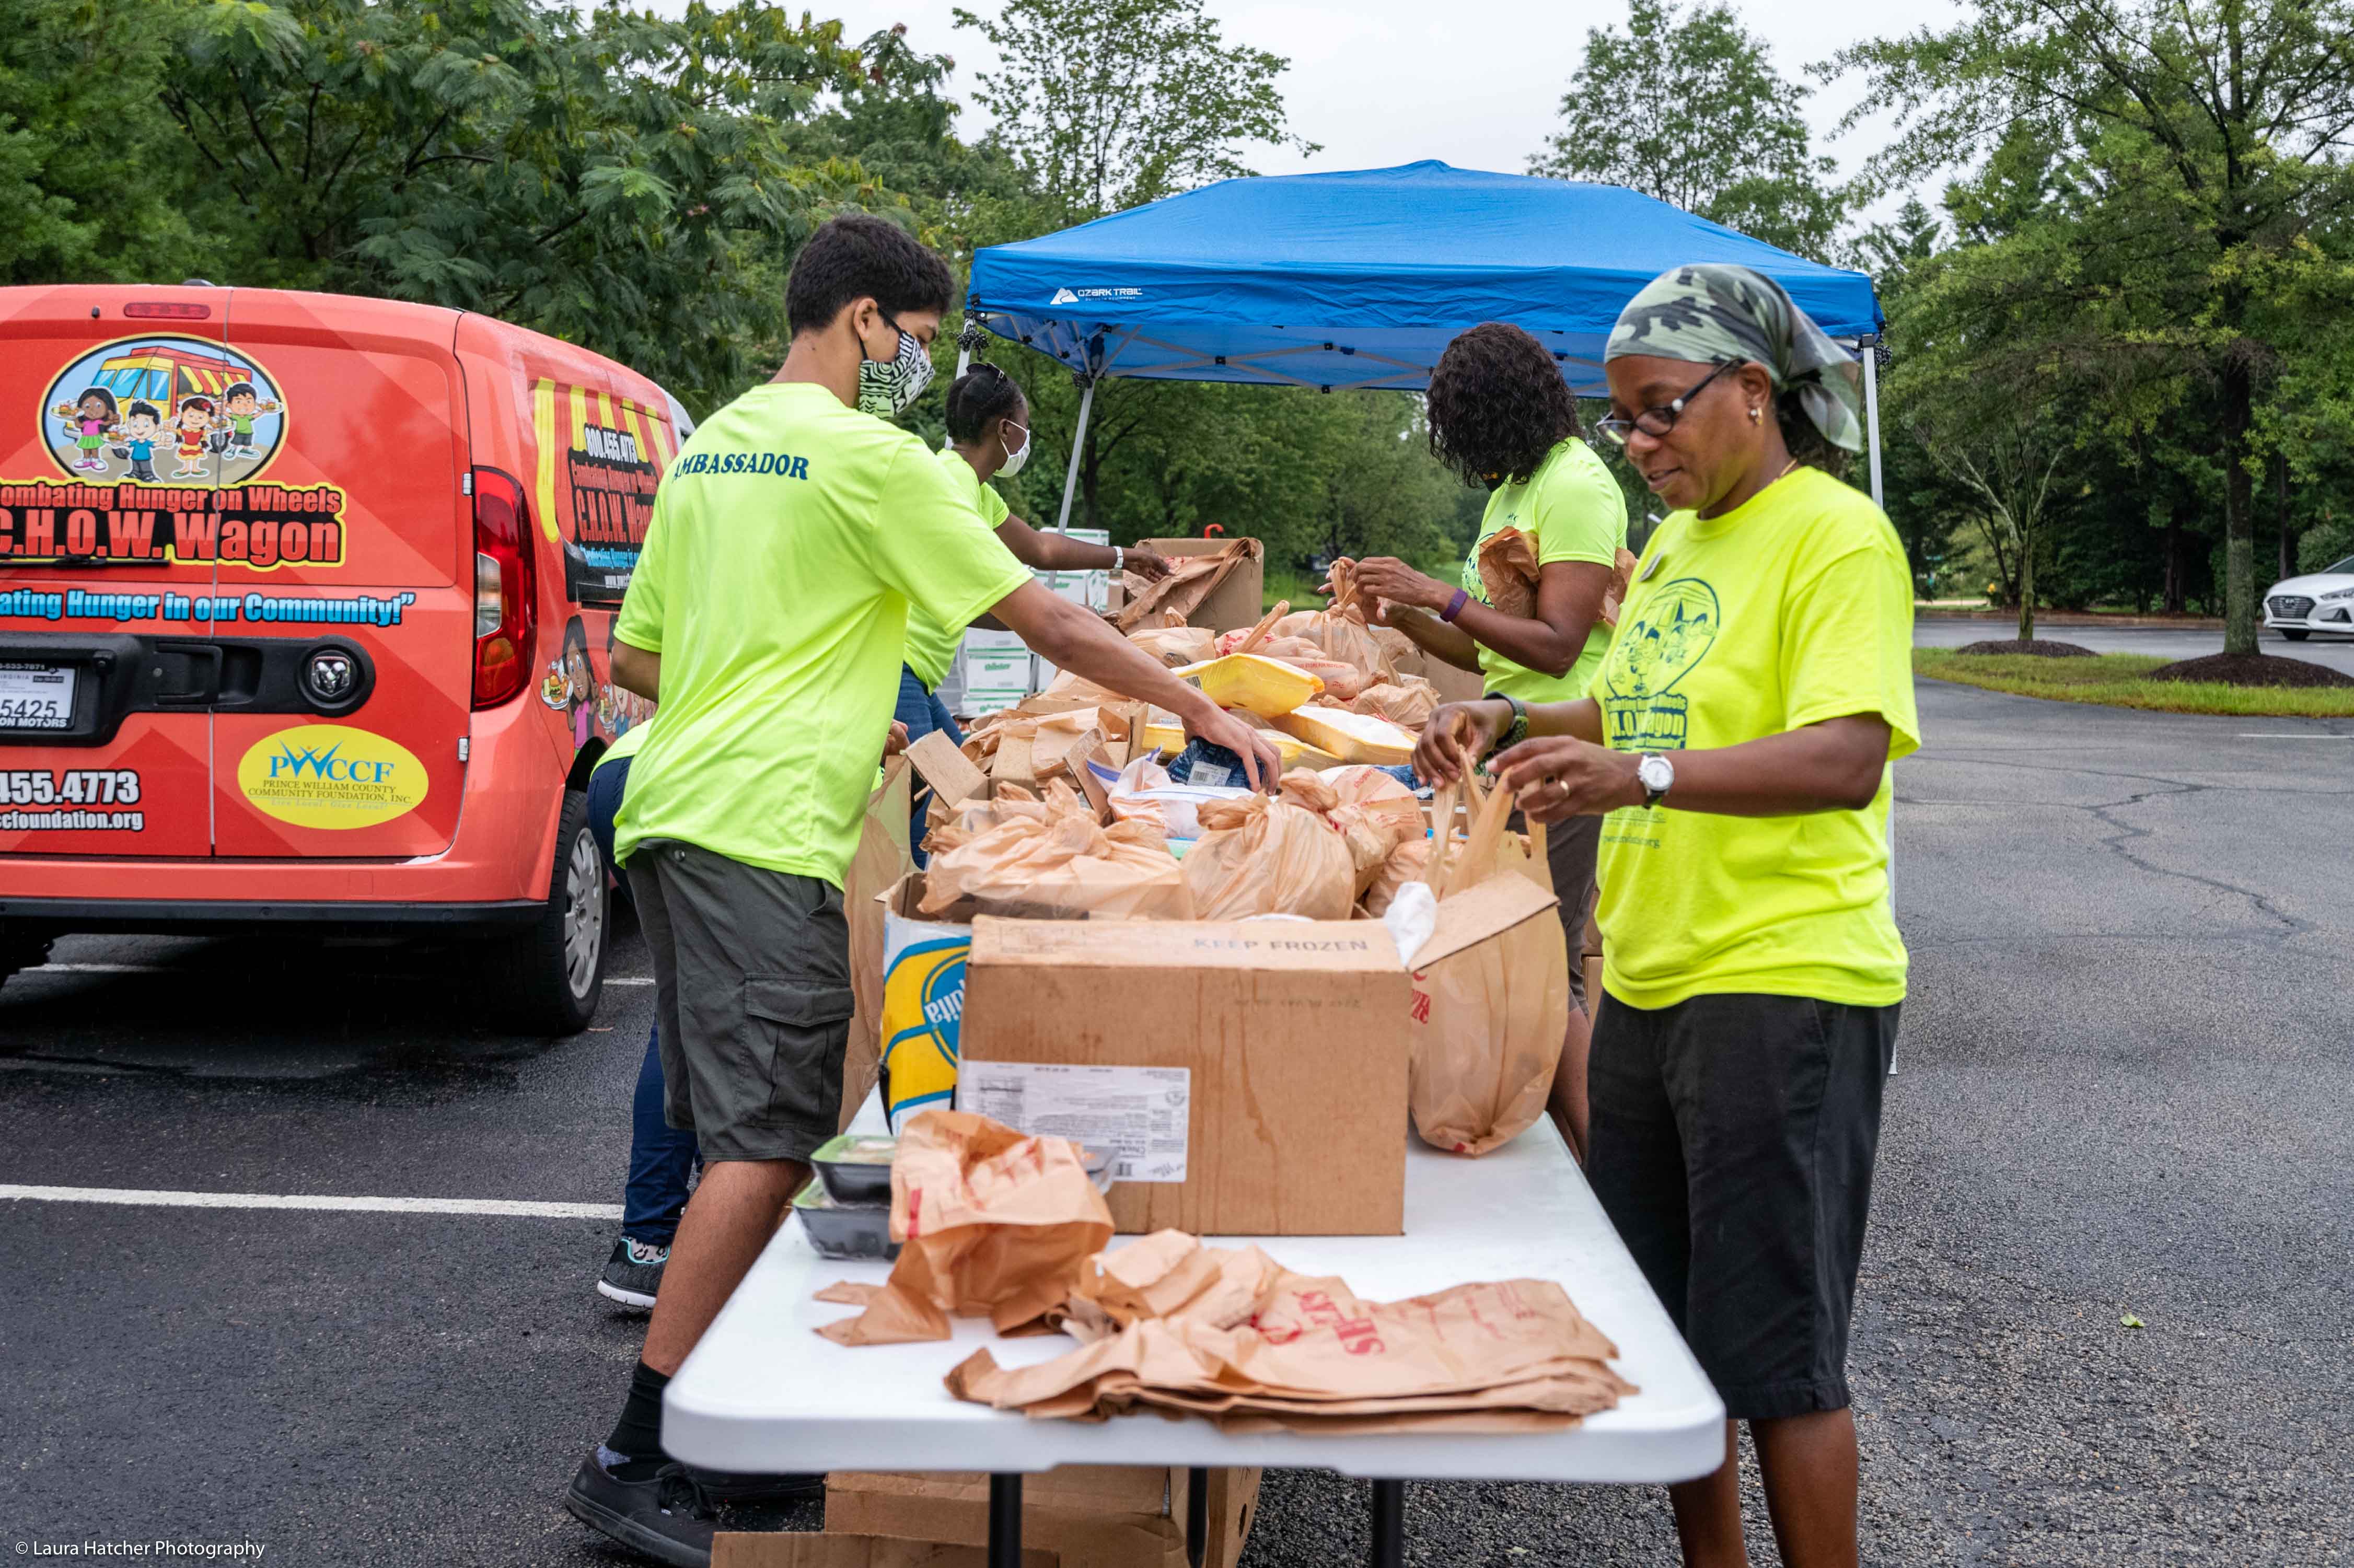 A group of volunteers wearing neon green shirts sorting boxes of food on a table set up in a parking lot, next to a blue makeshift tent and the C.H.O.W. Wagon